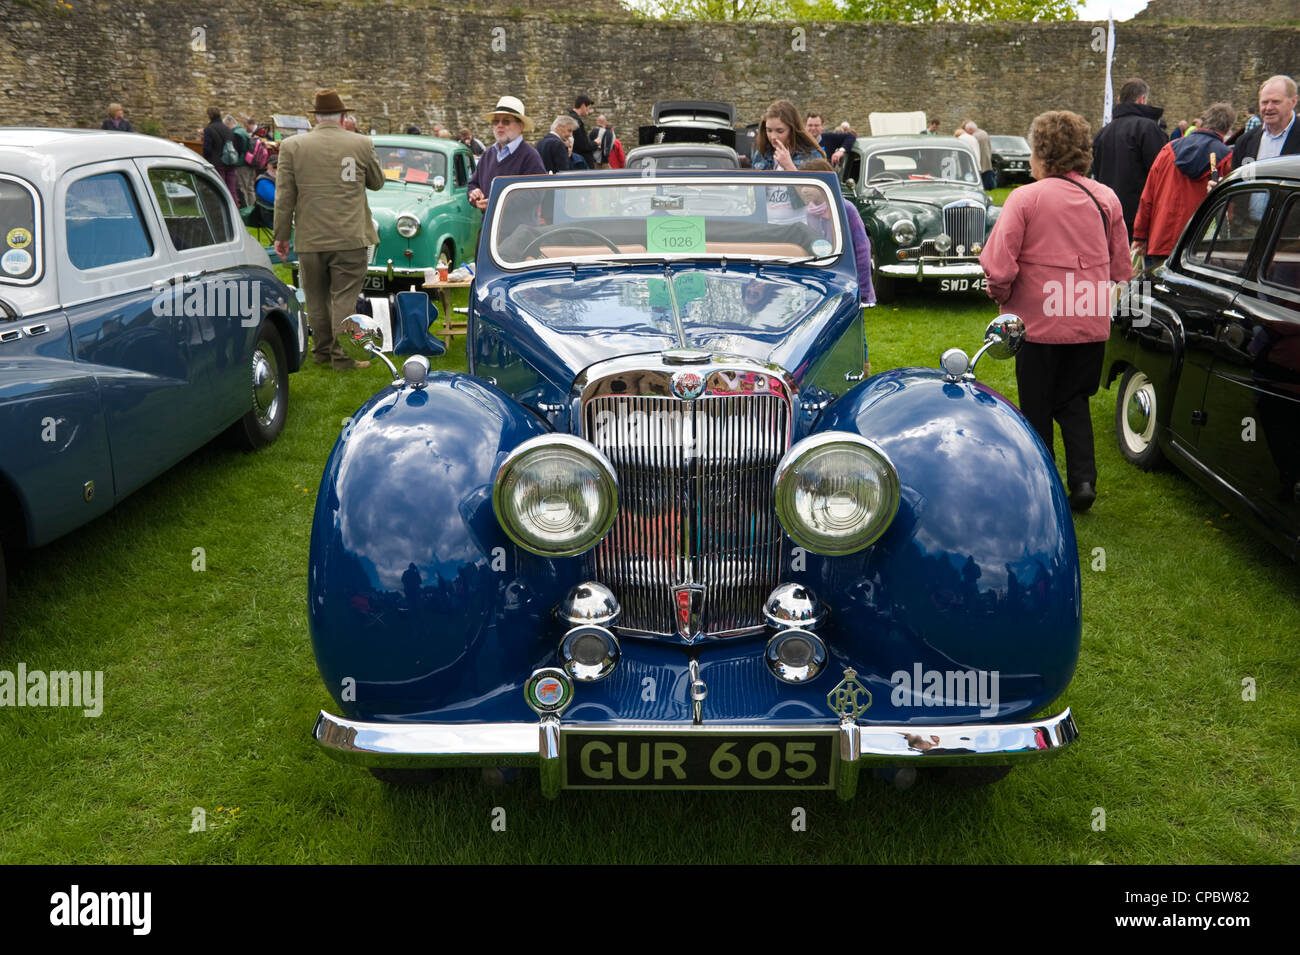 Vintage classic blue Triumph Roadster convertible sports car on display at the Marches Transport Festival exhibition of vintage and classic cars on show at Ludlow Spring Food Festival Stock Photo